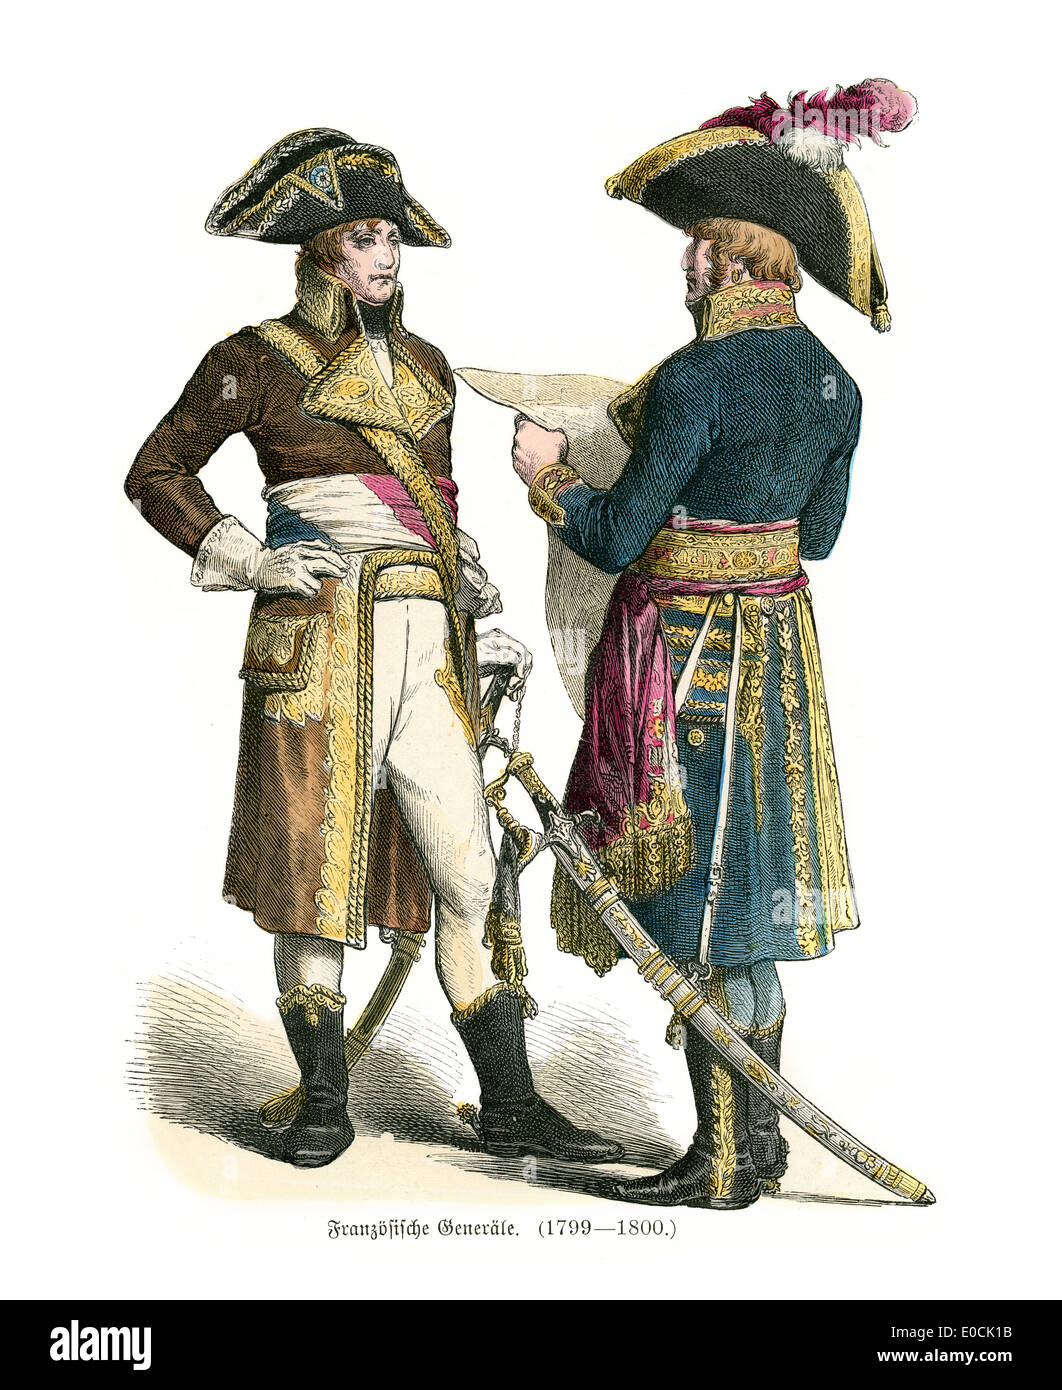 Traditional costumes of French General's, 1799 to 1800 Stock Photo